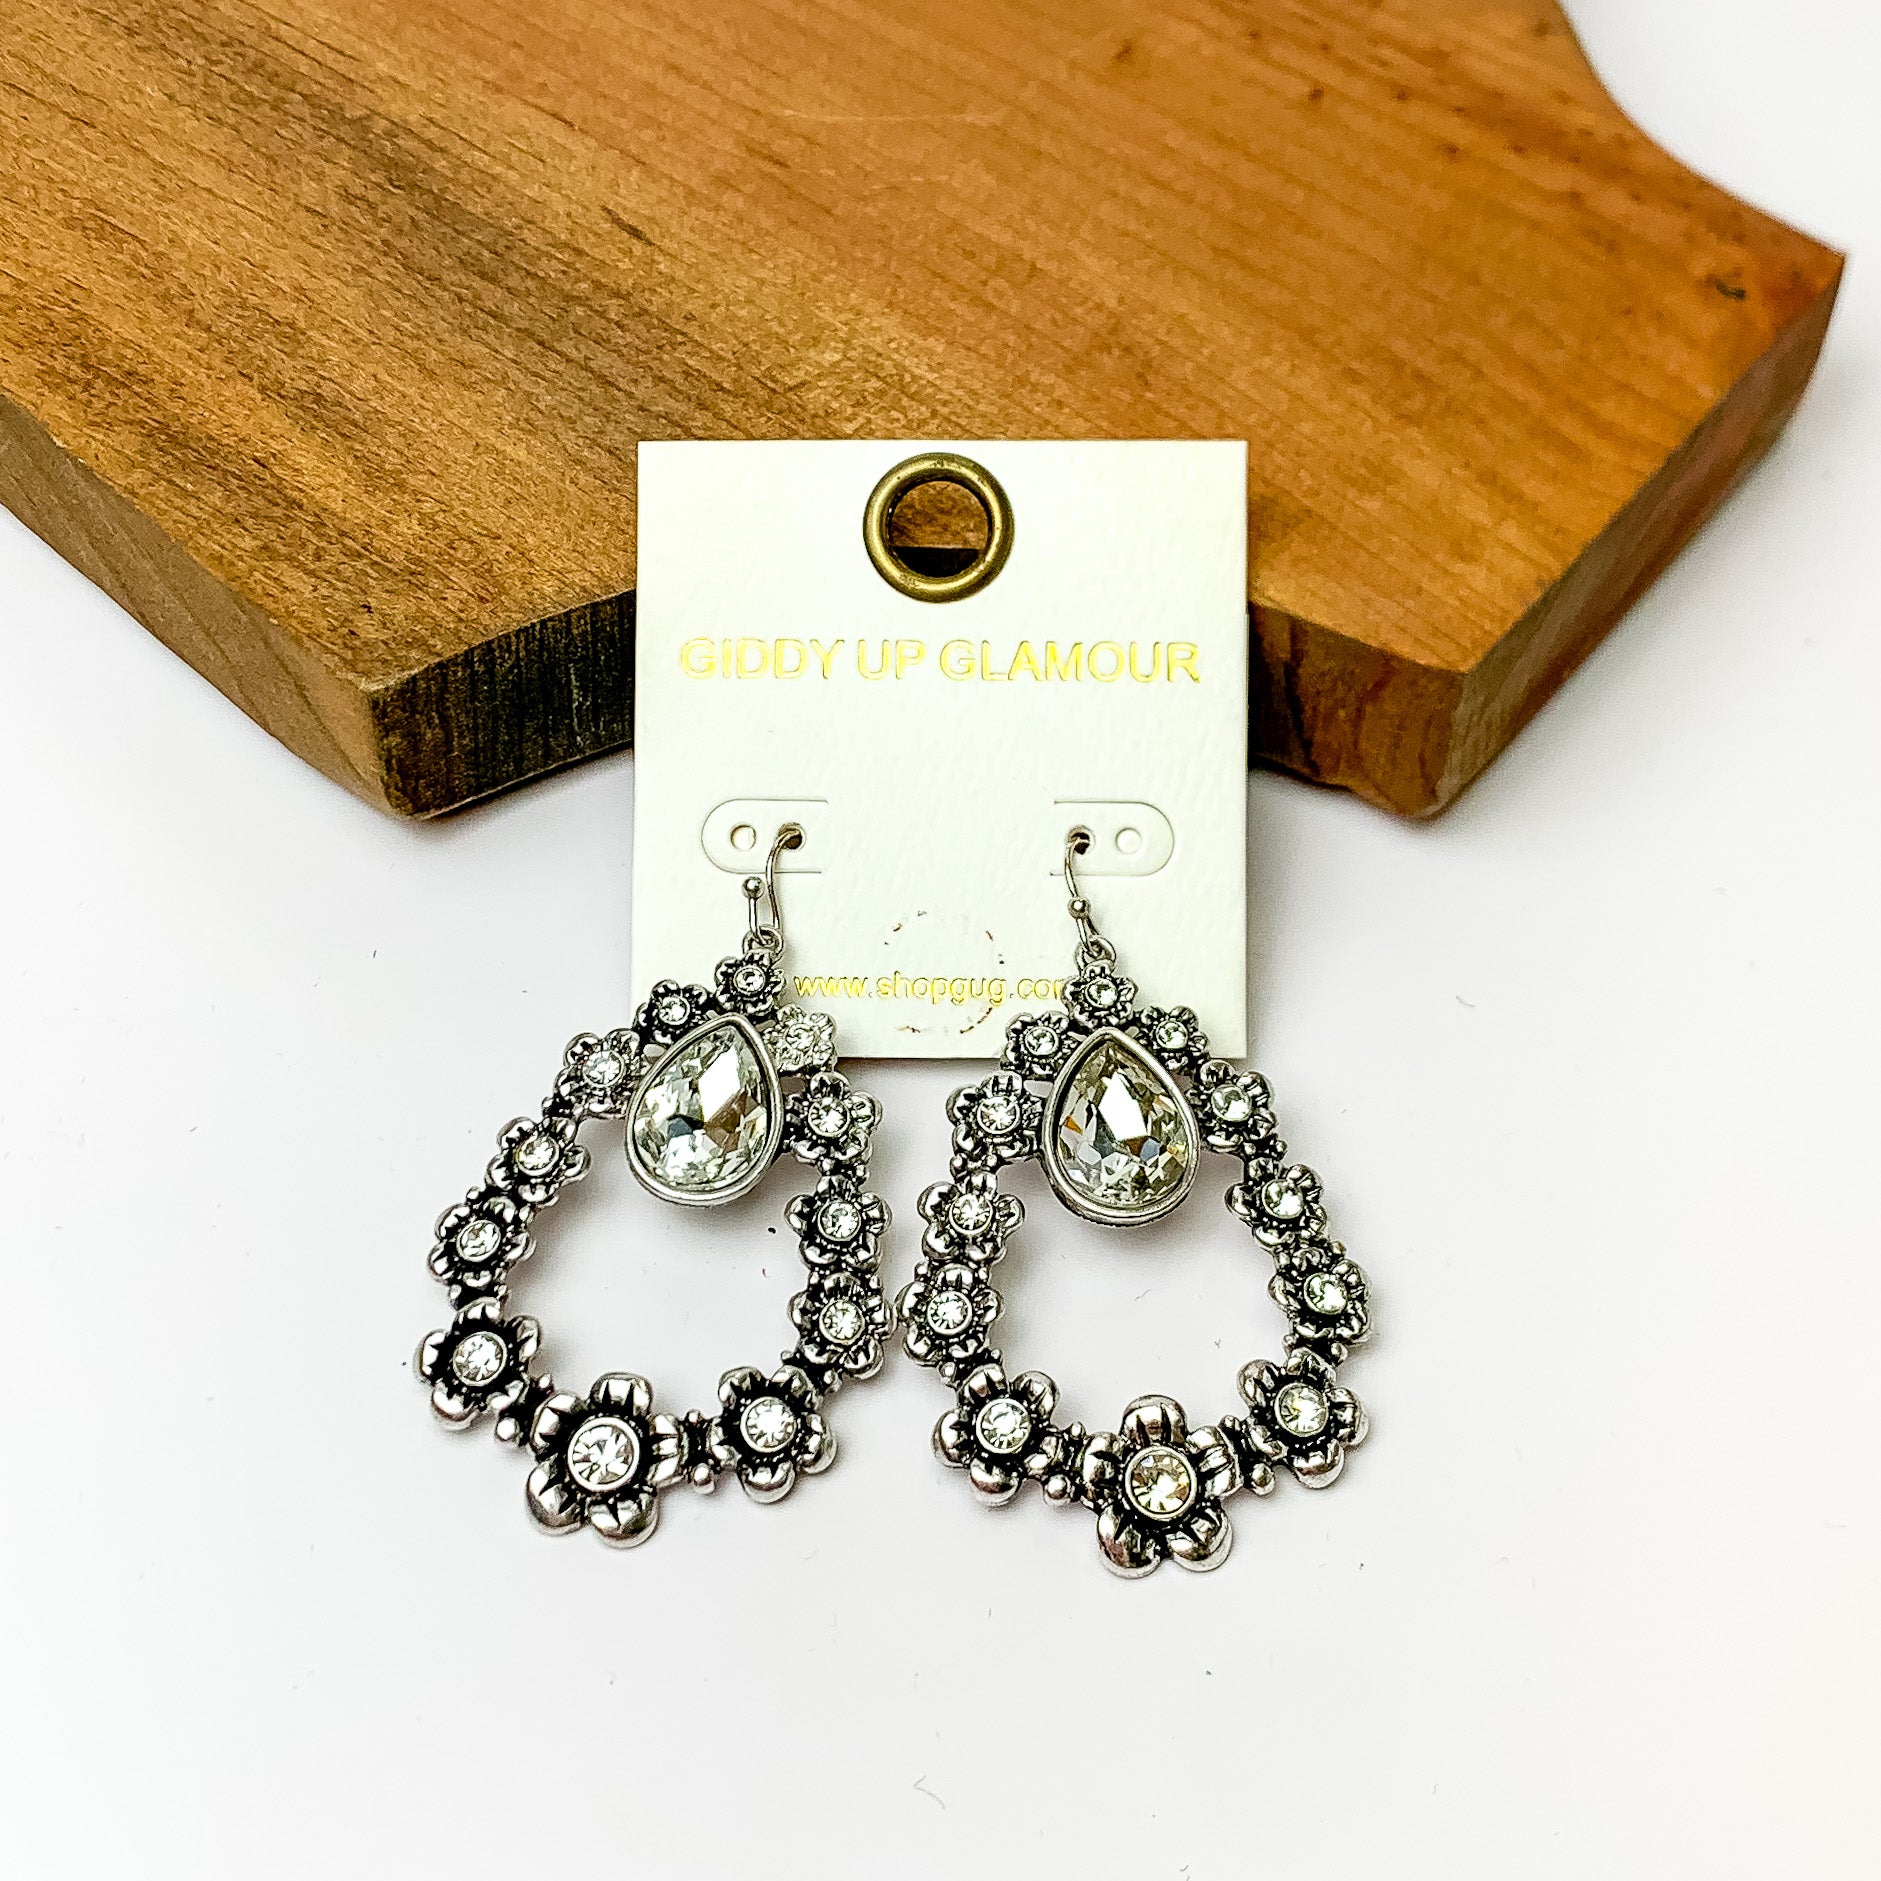 Silver open drop earrings with flowers connecting and clear crystals. Pictured on a white background with a wood piece at the top.